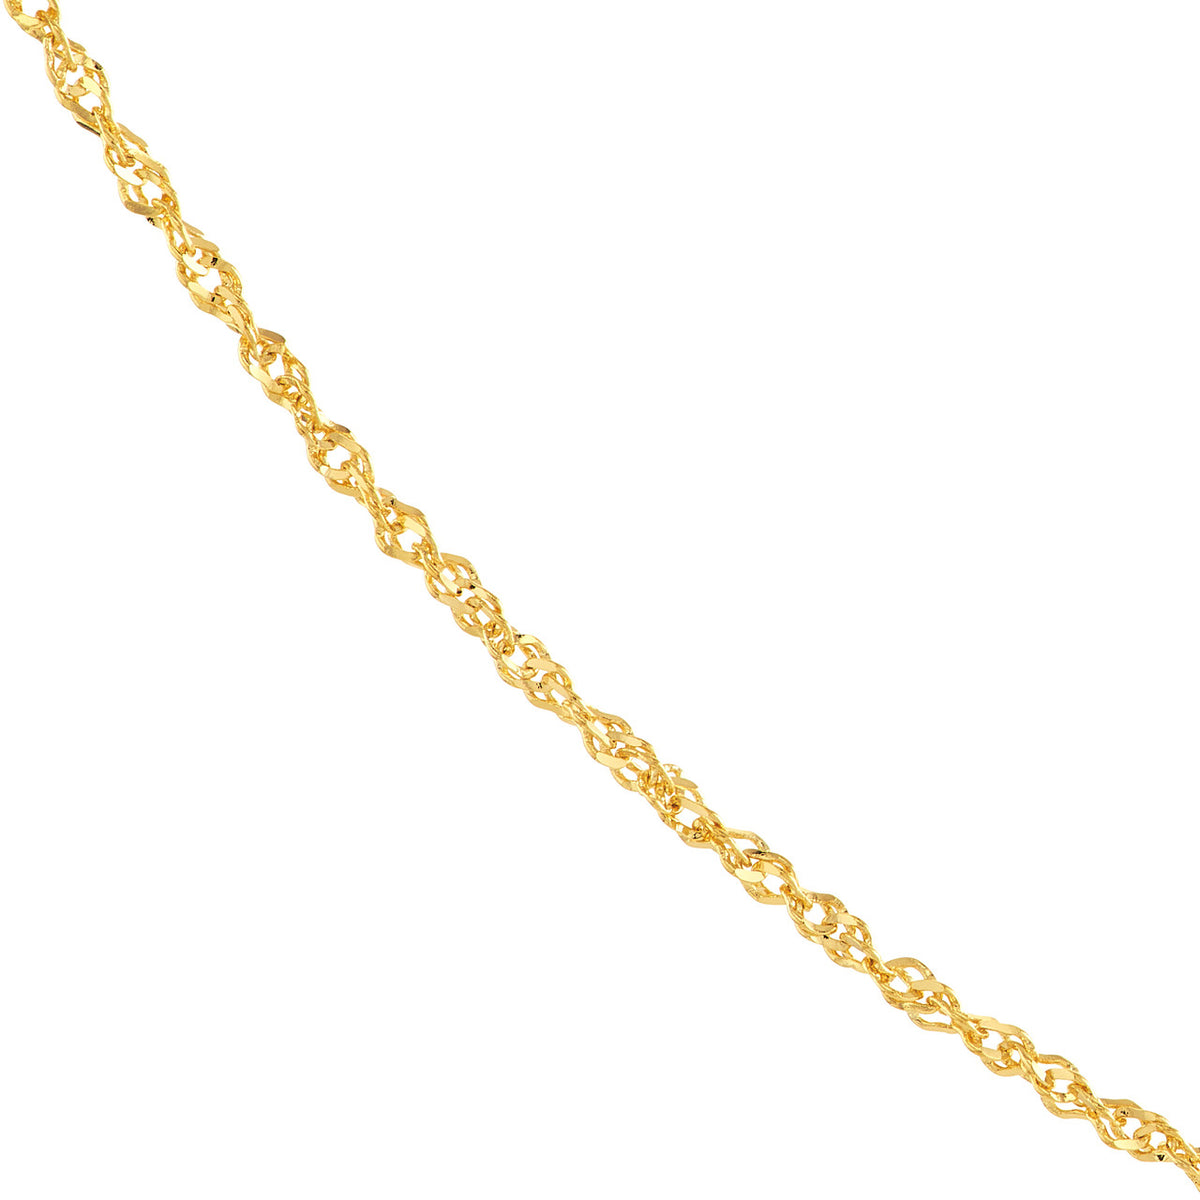 14K Yellow Gold and White Gold 0.8mm Sparkle Singapore Chain Necklace with Spring Ring